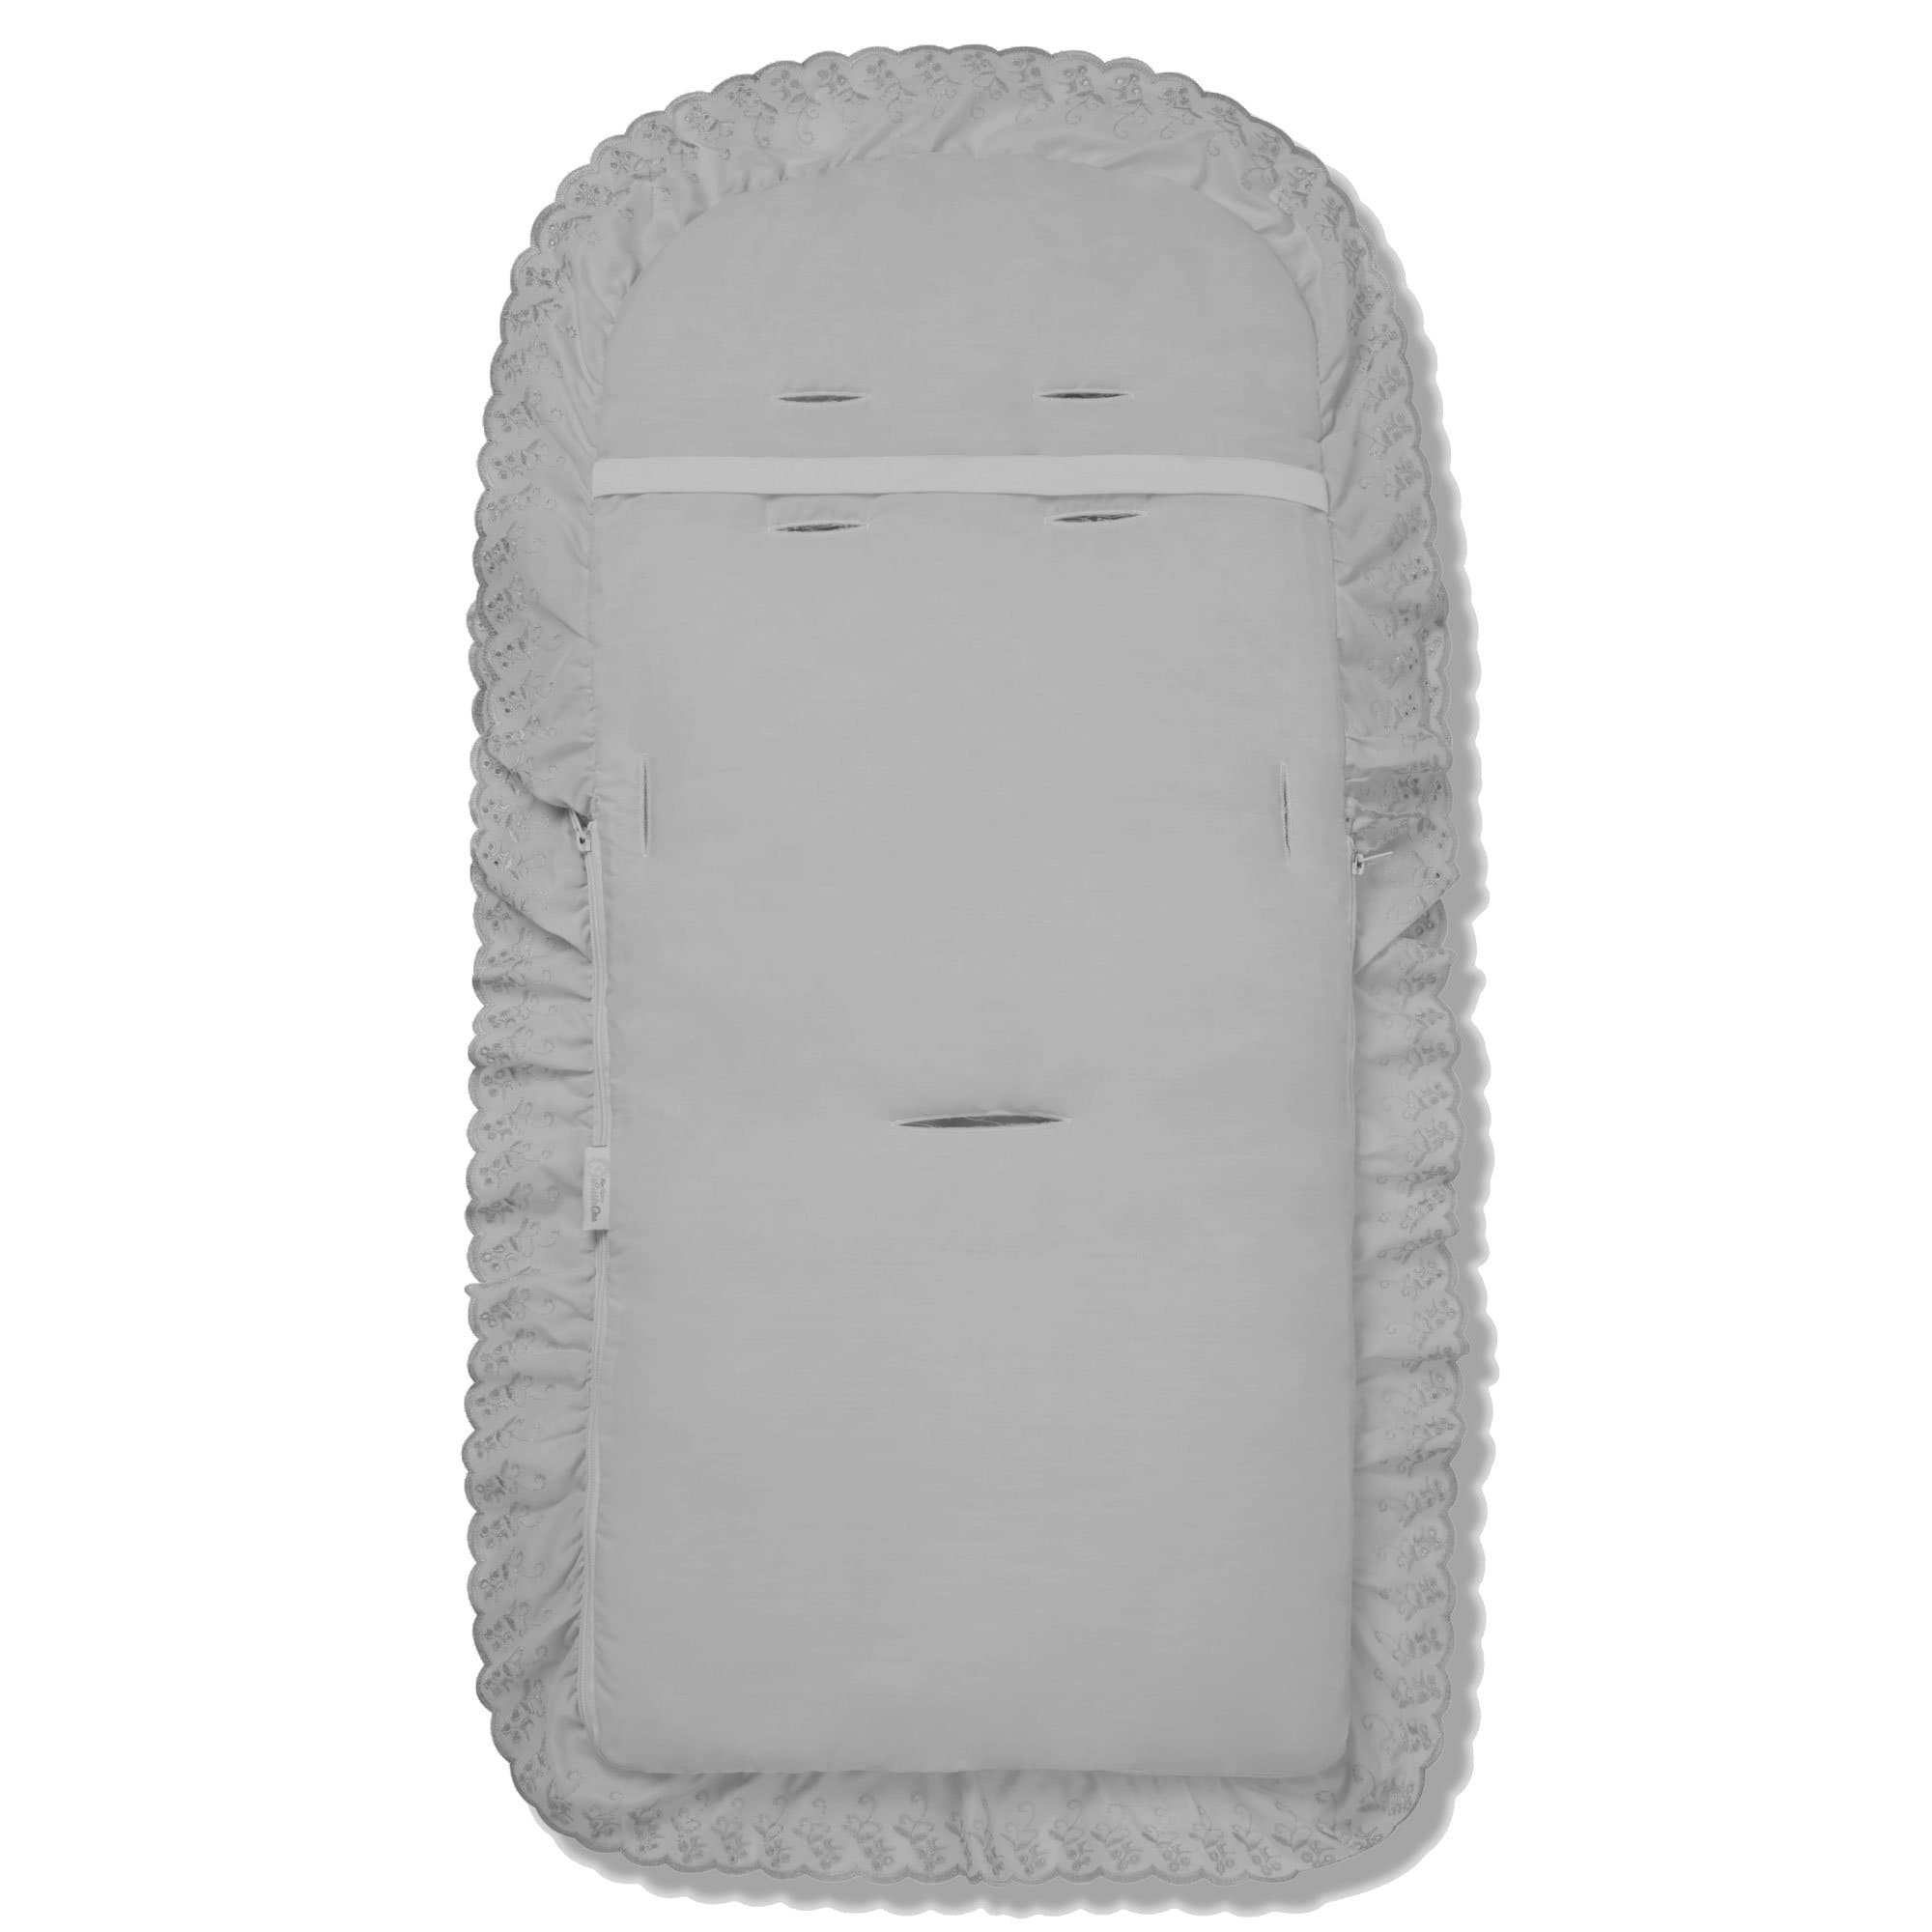 Broderie Anglaise Footmuff / Cosy Toes Compatible with Mutsy -  | For Your Little One